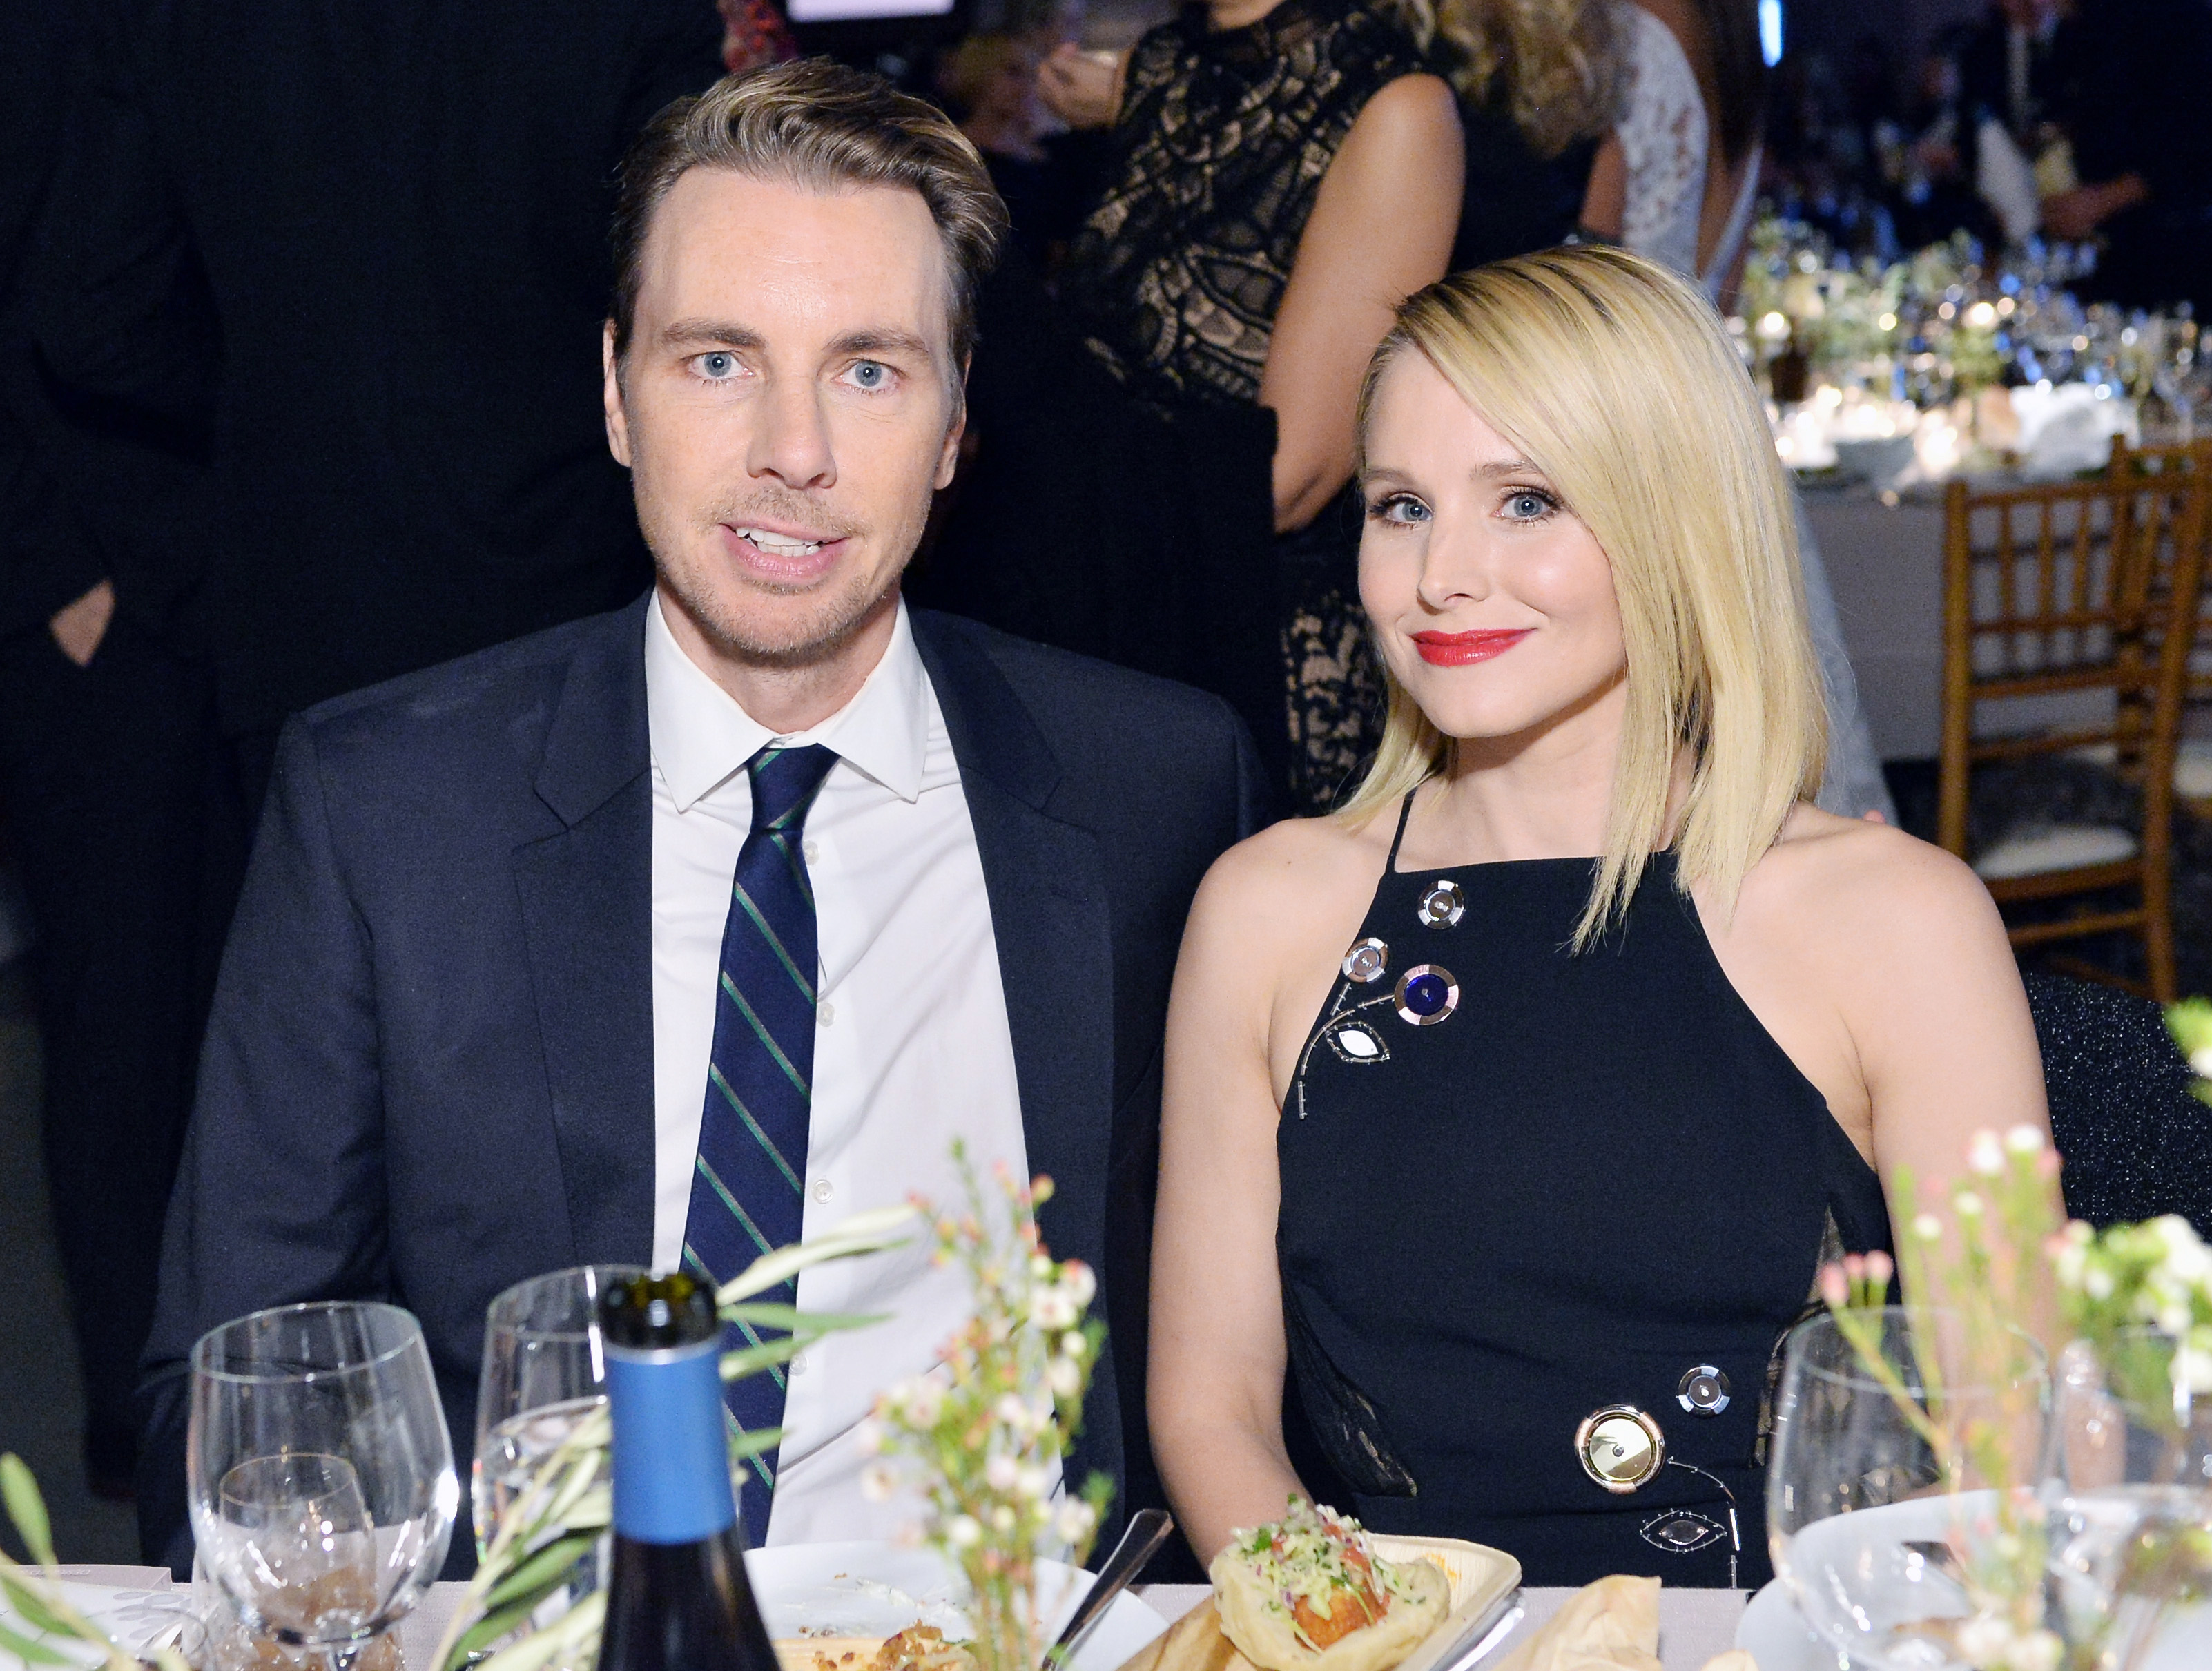 Dax Shepard and Kristen Bell sit down for dinner at an event.